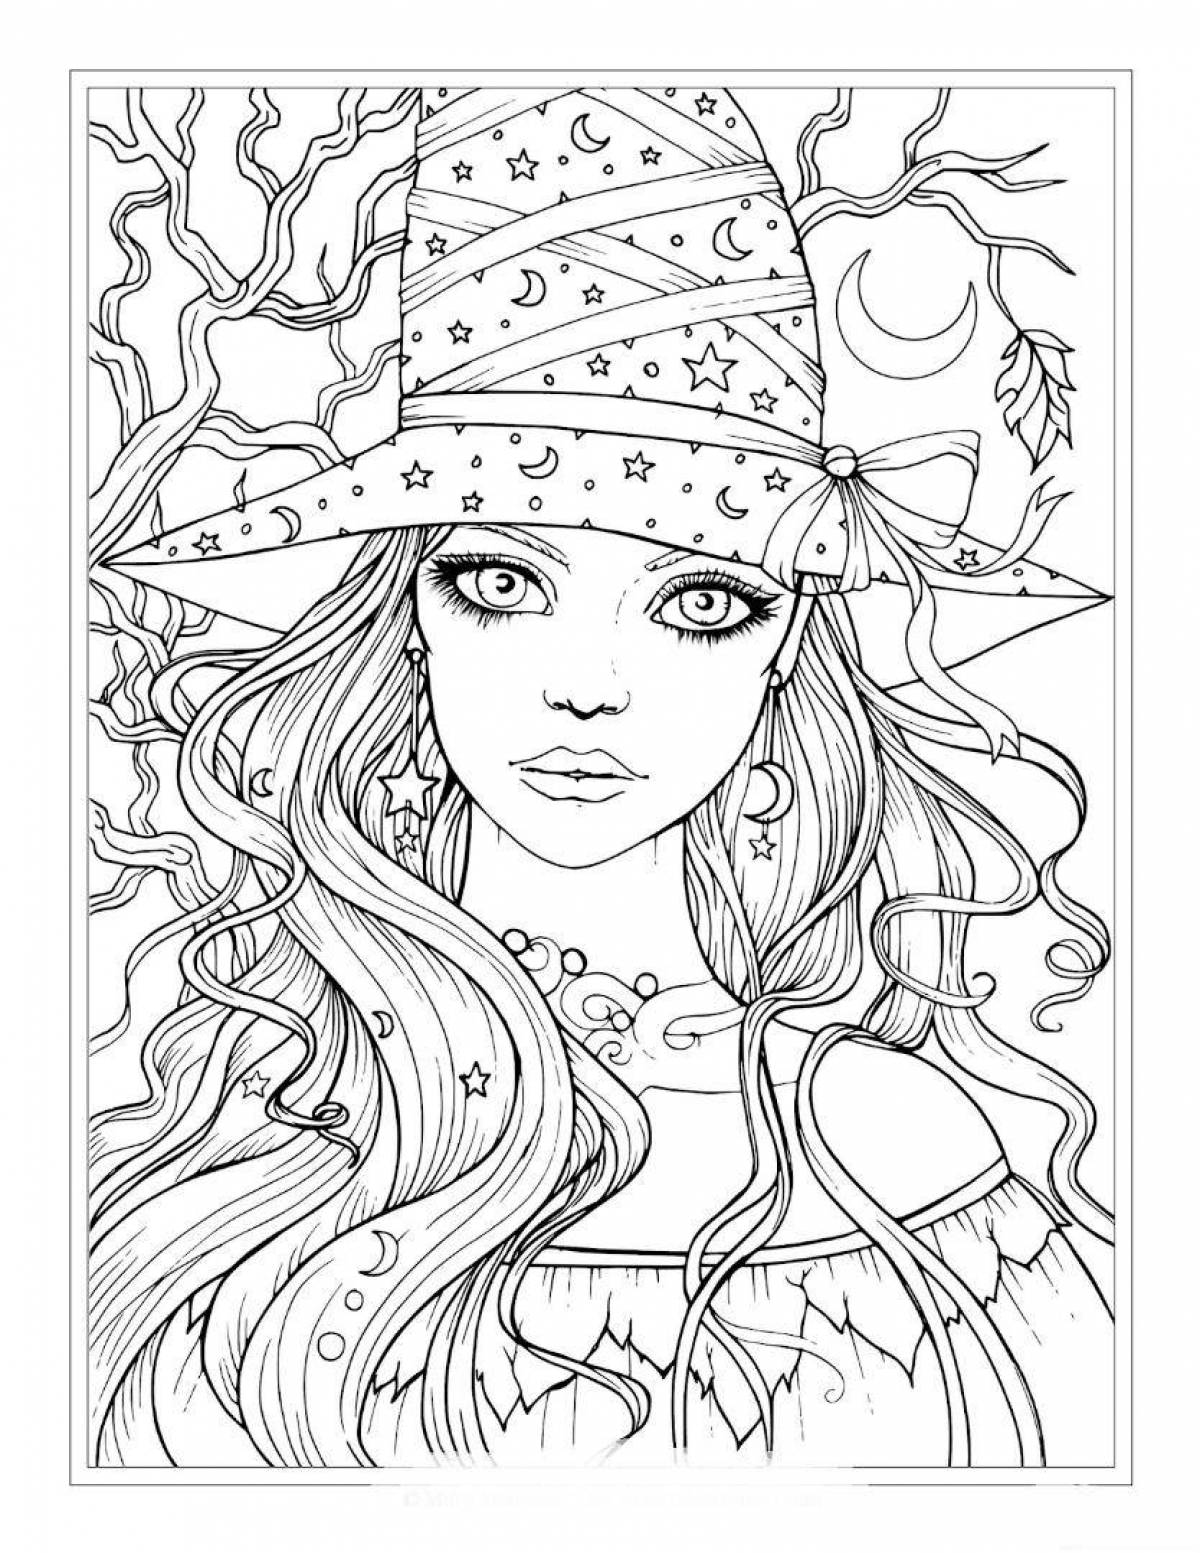 Fun coloring book for 13 year old girls